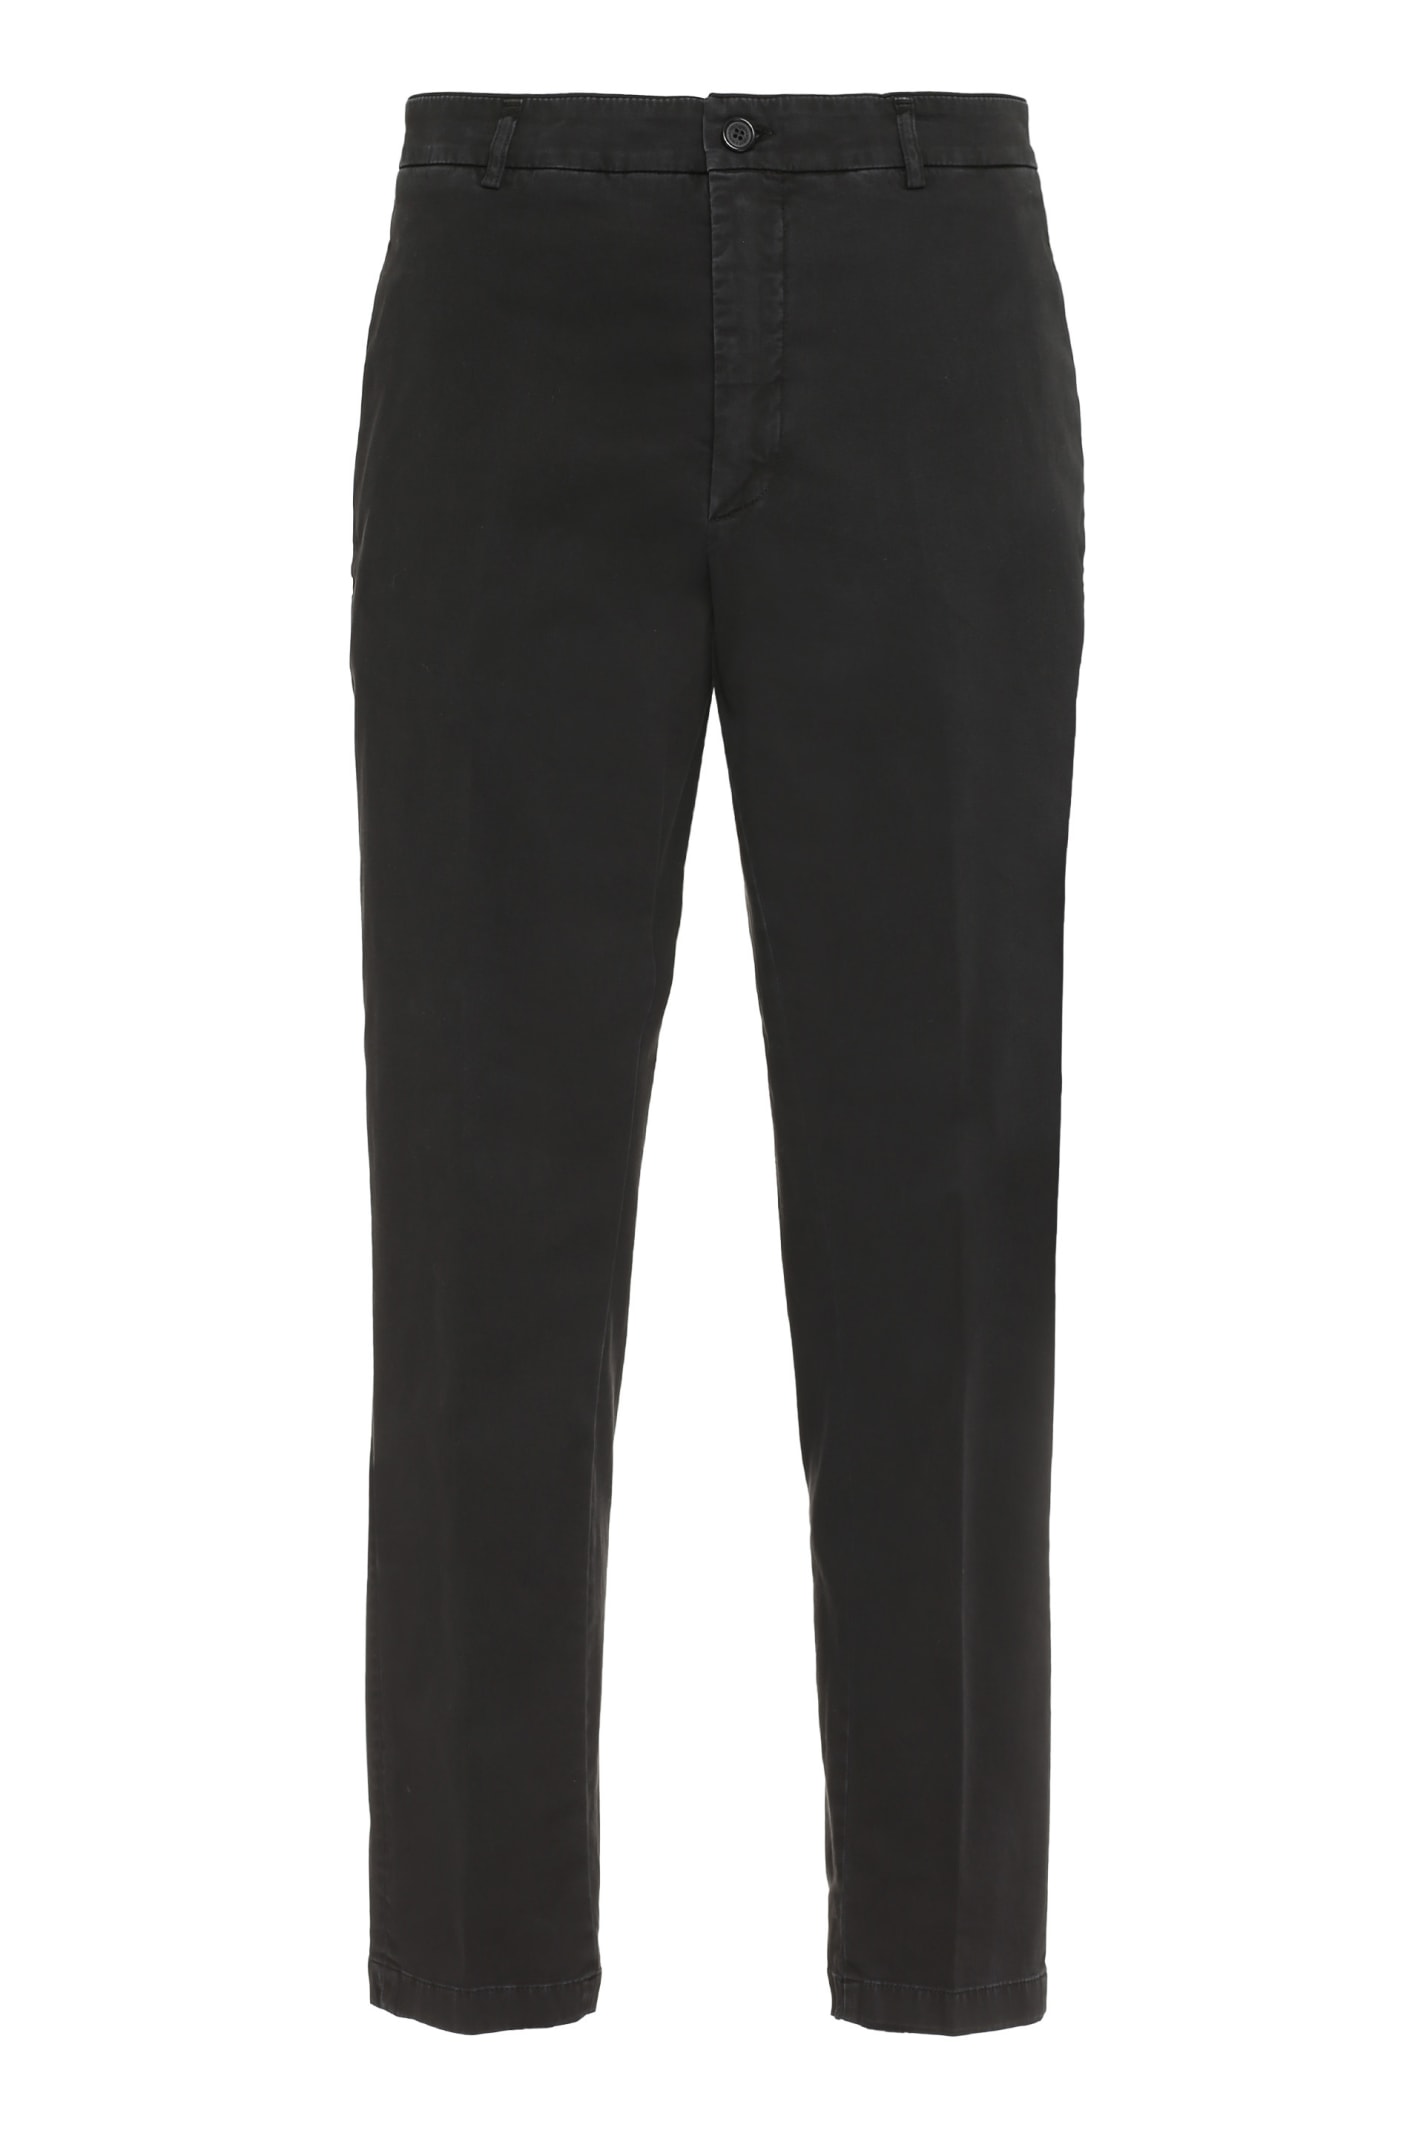 Department 5 George Cotton Trousers